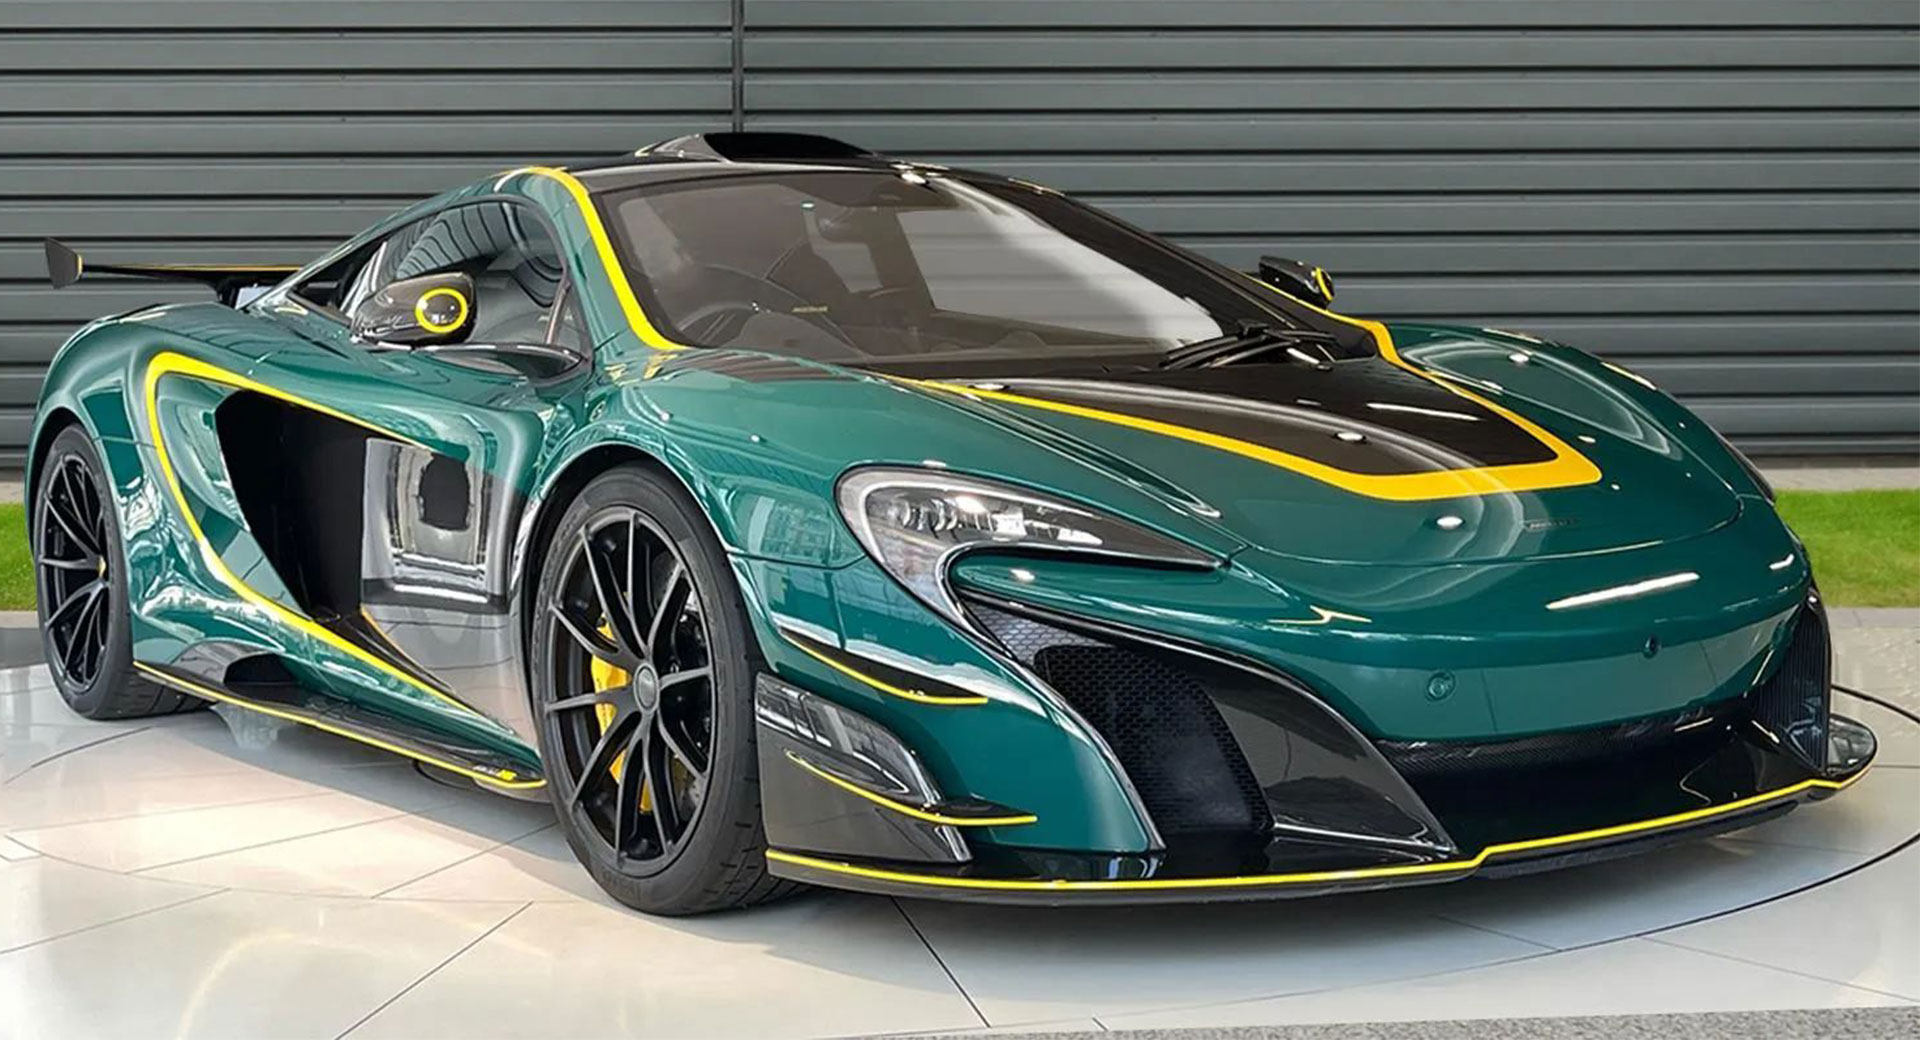 Msoxxx - Who Wouldn't Want A 1-of-25 McLaren MSO HS Like This? | Carscoops